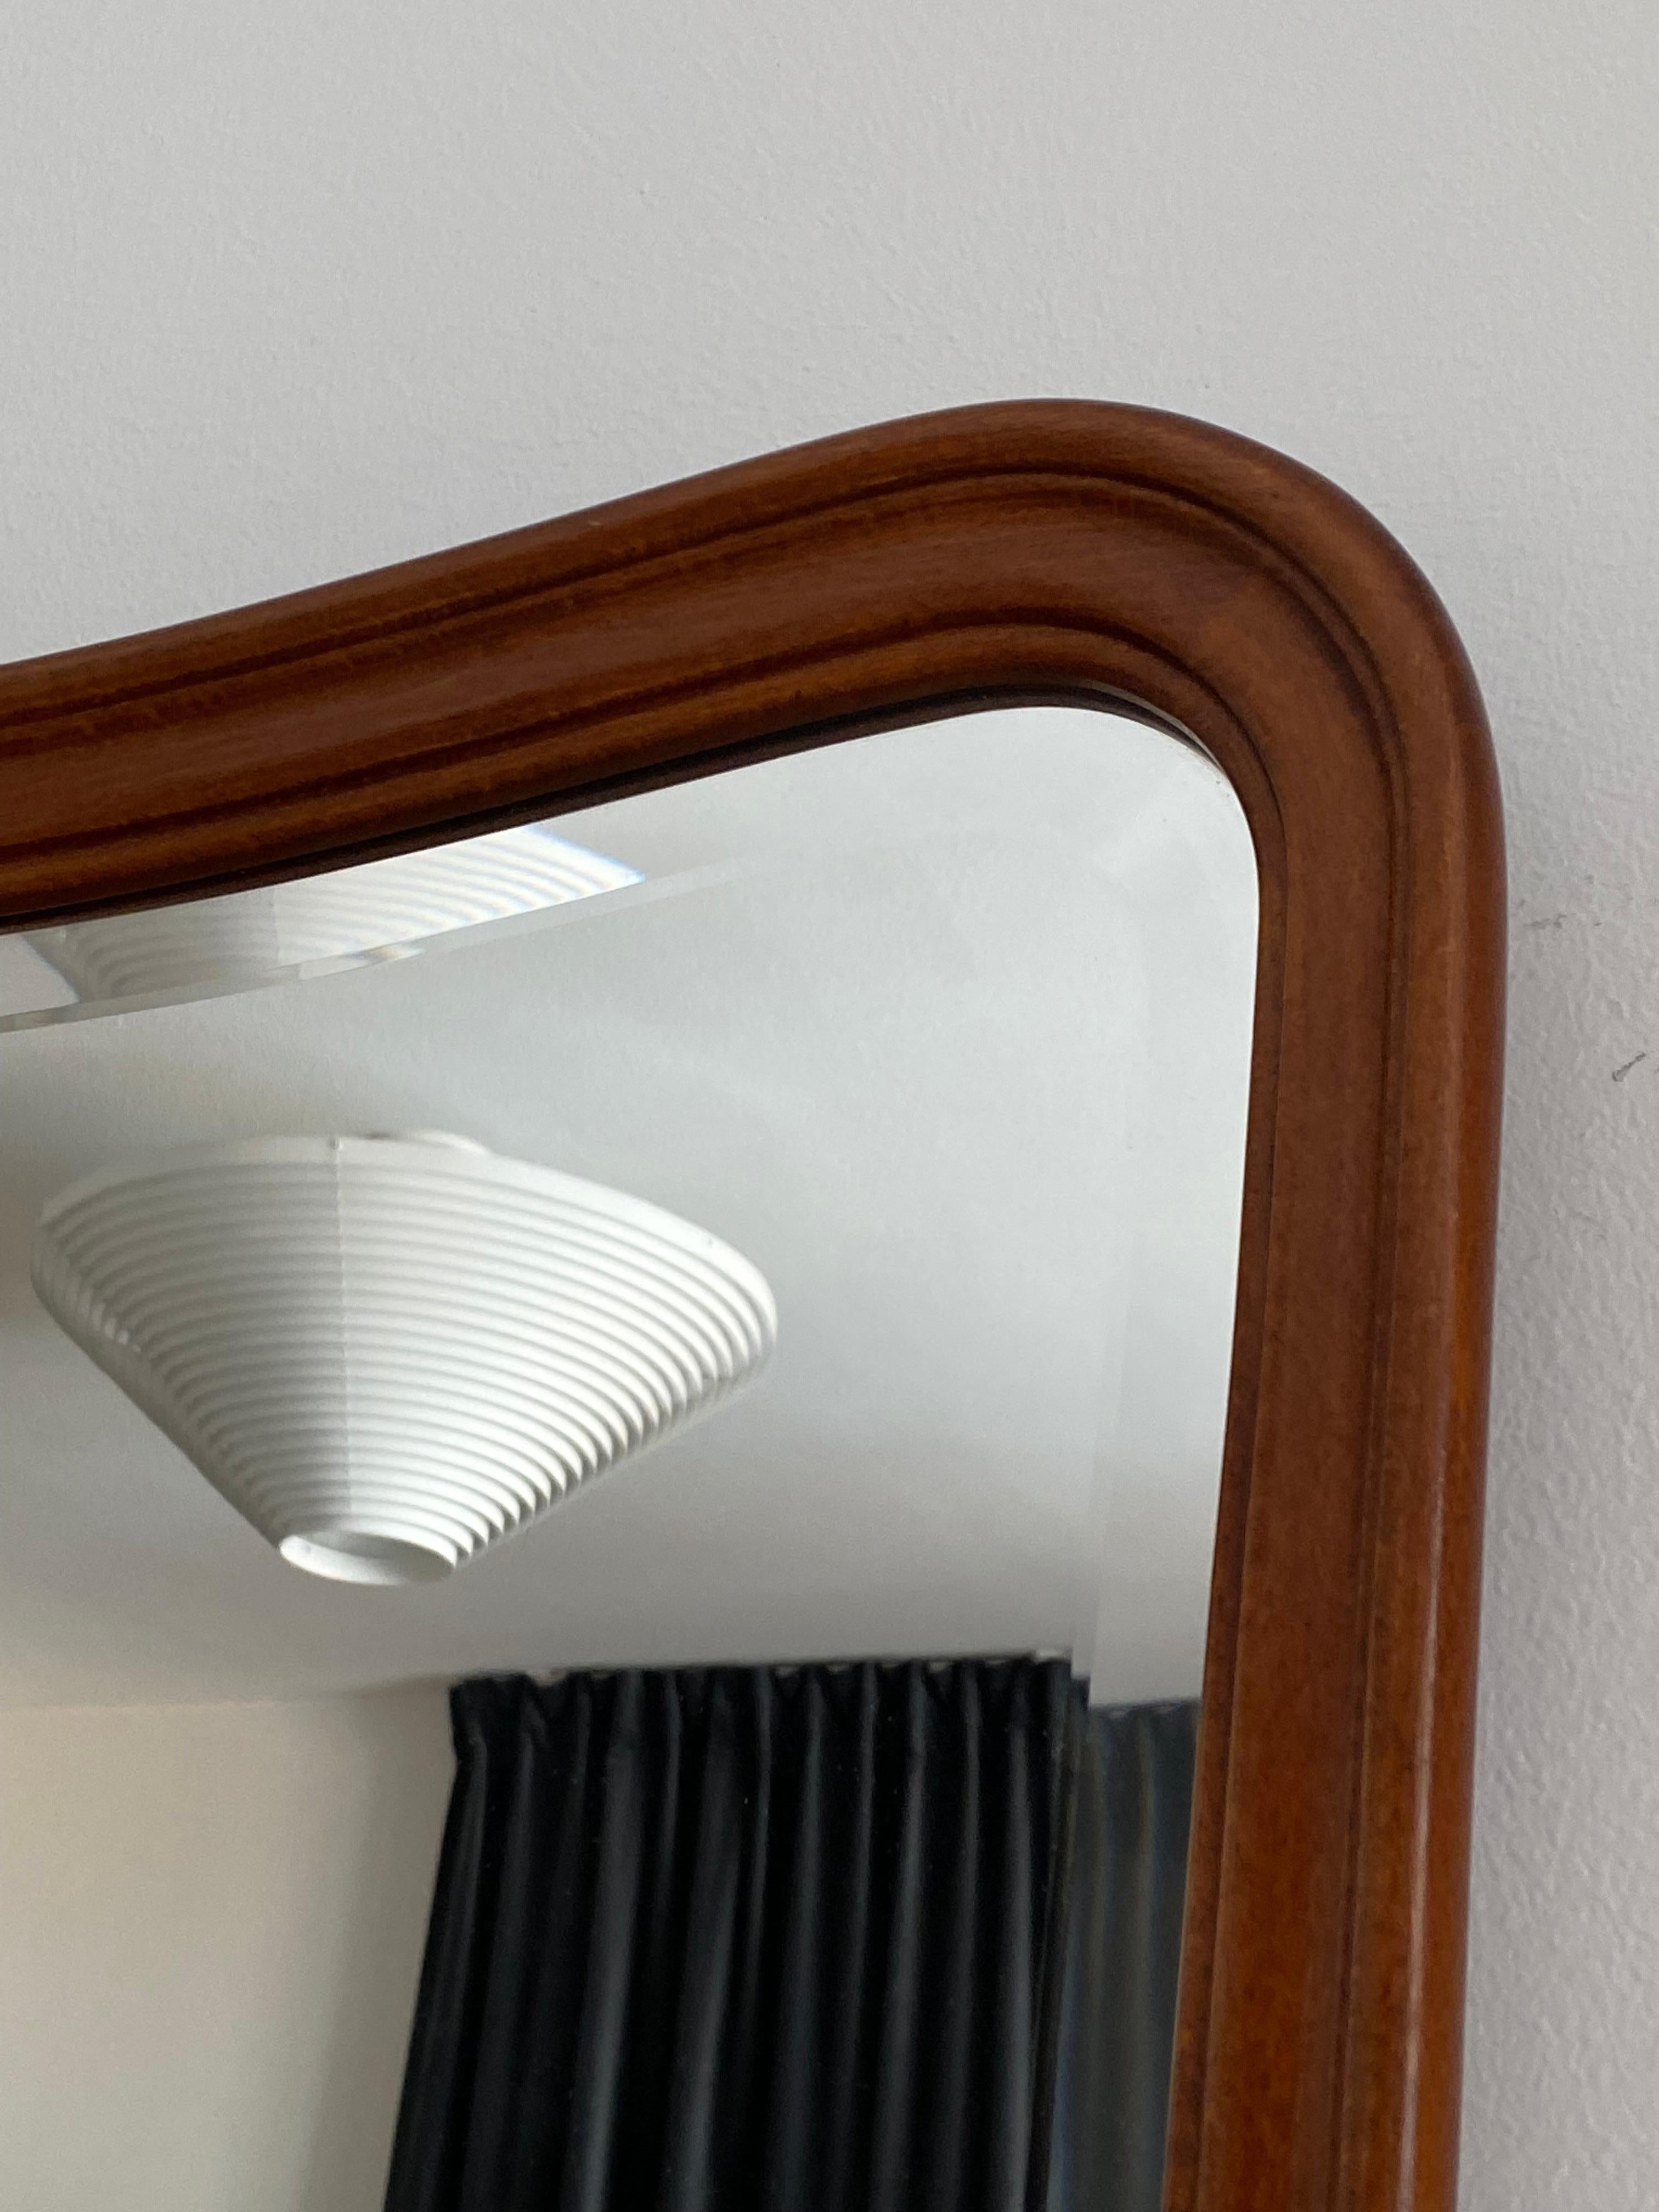 A rare organic wall mirror produced by AB Glas & Trä, Hovmantorp, Sweden. In sculpted teak and crystal mirror glass, labeled. 

Other designers of the period working in the organic style include Fontana Arte, Gio Ponti, and Paolo Buffa.